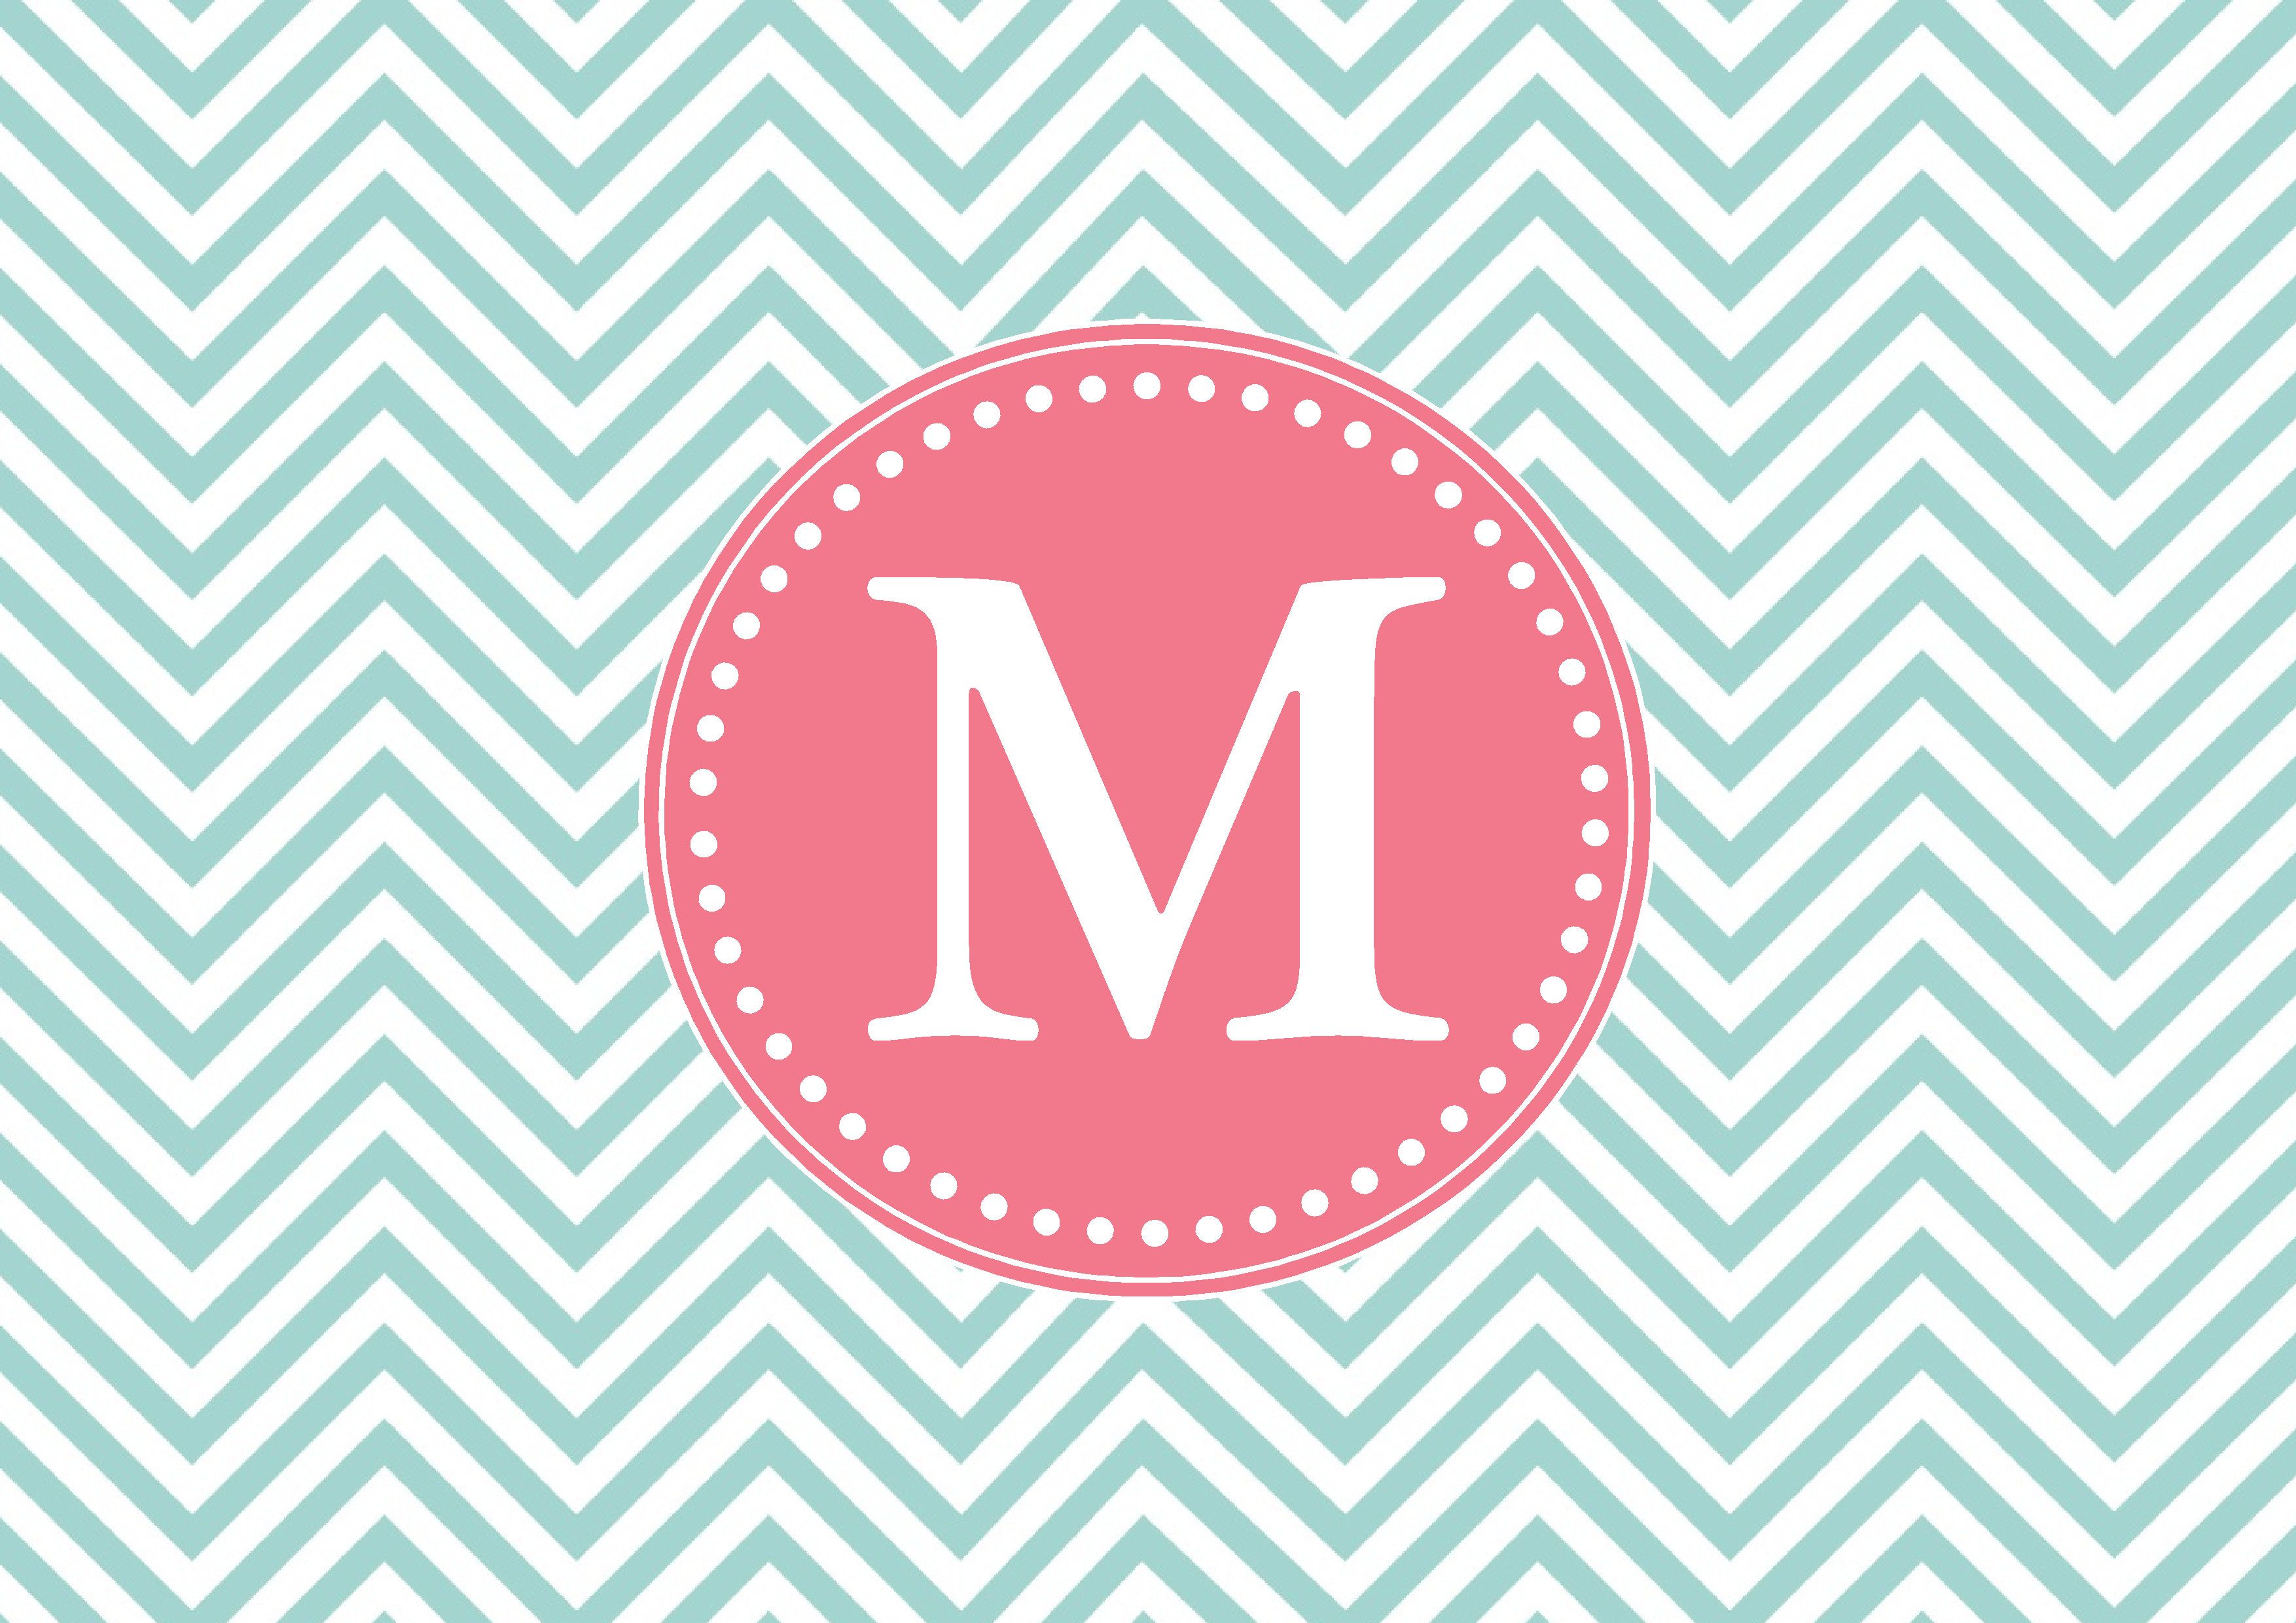 Chevron Wallpaper With Initials